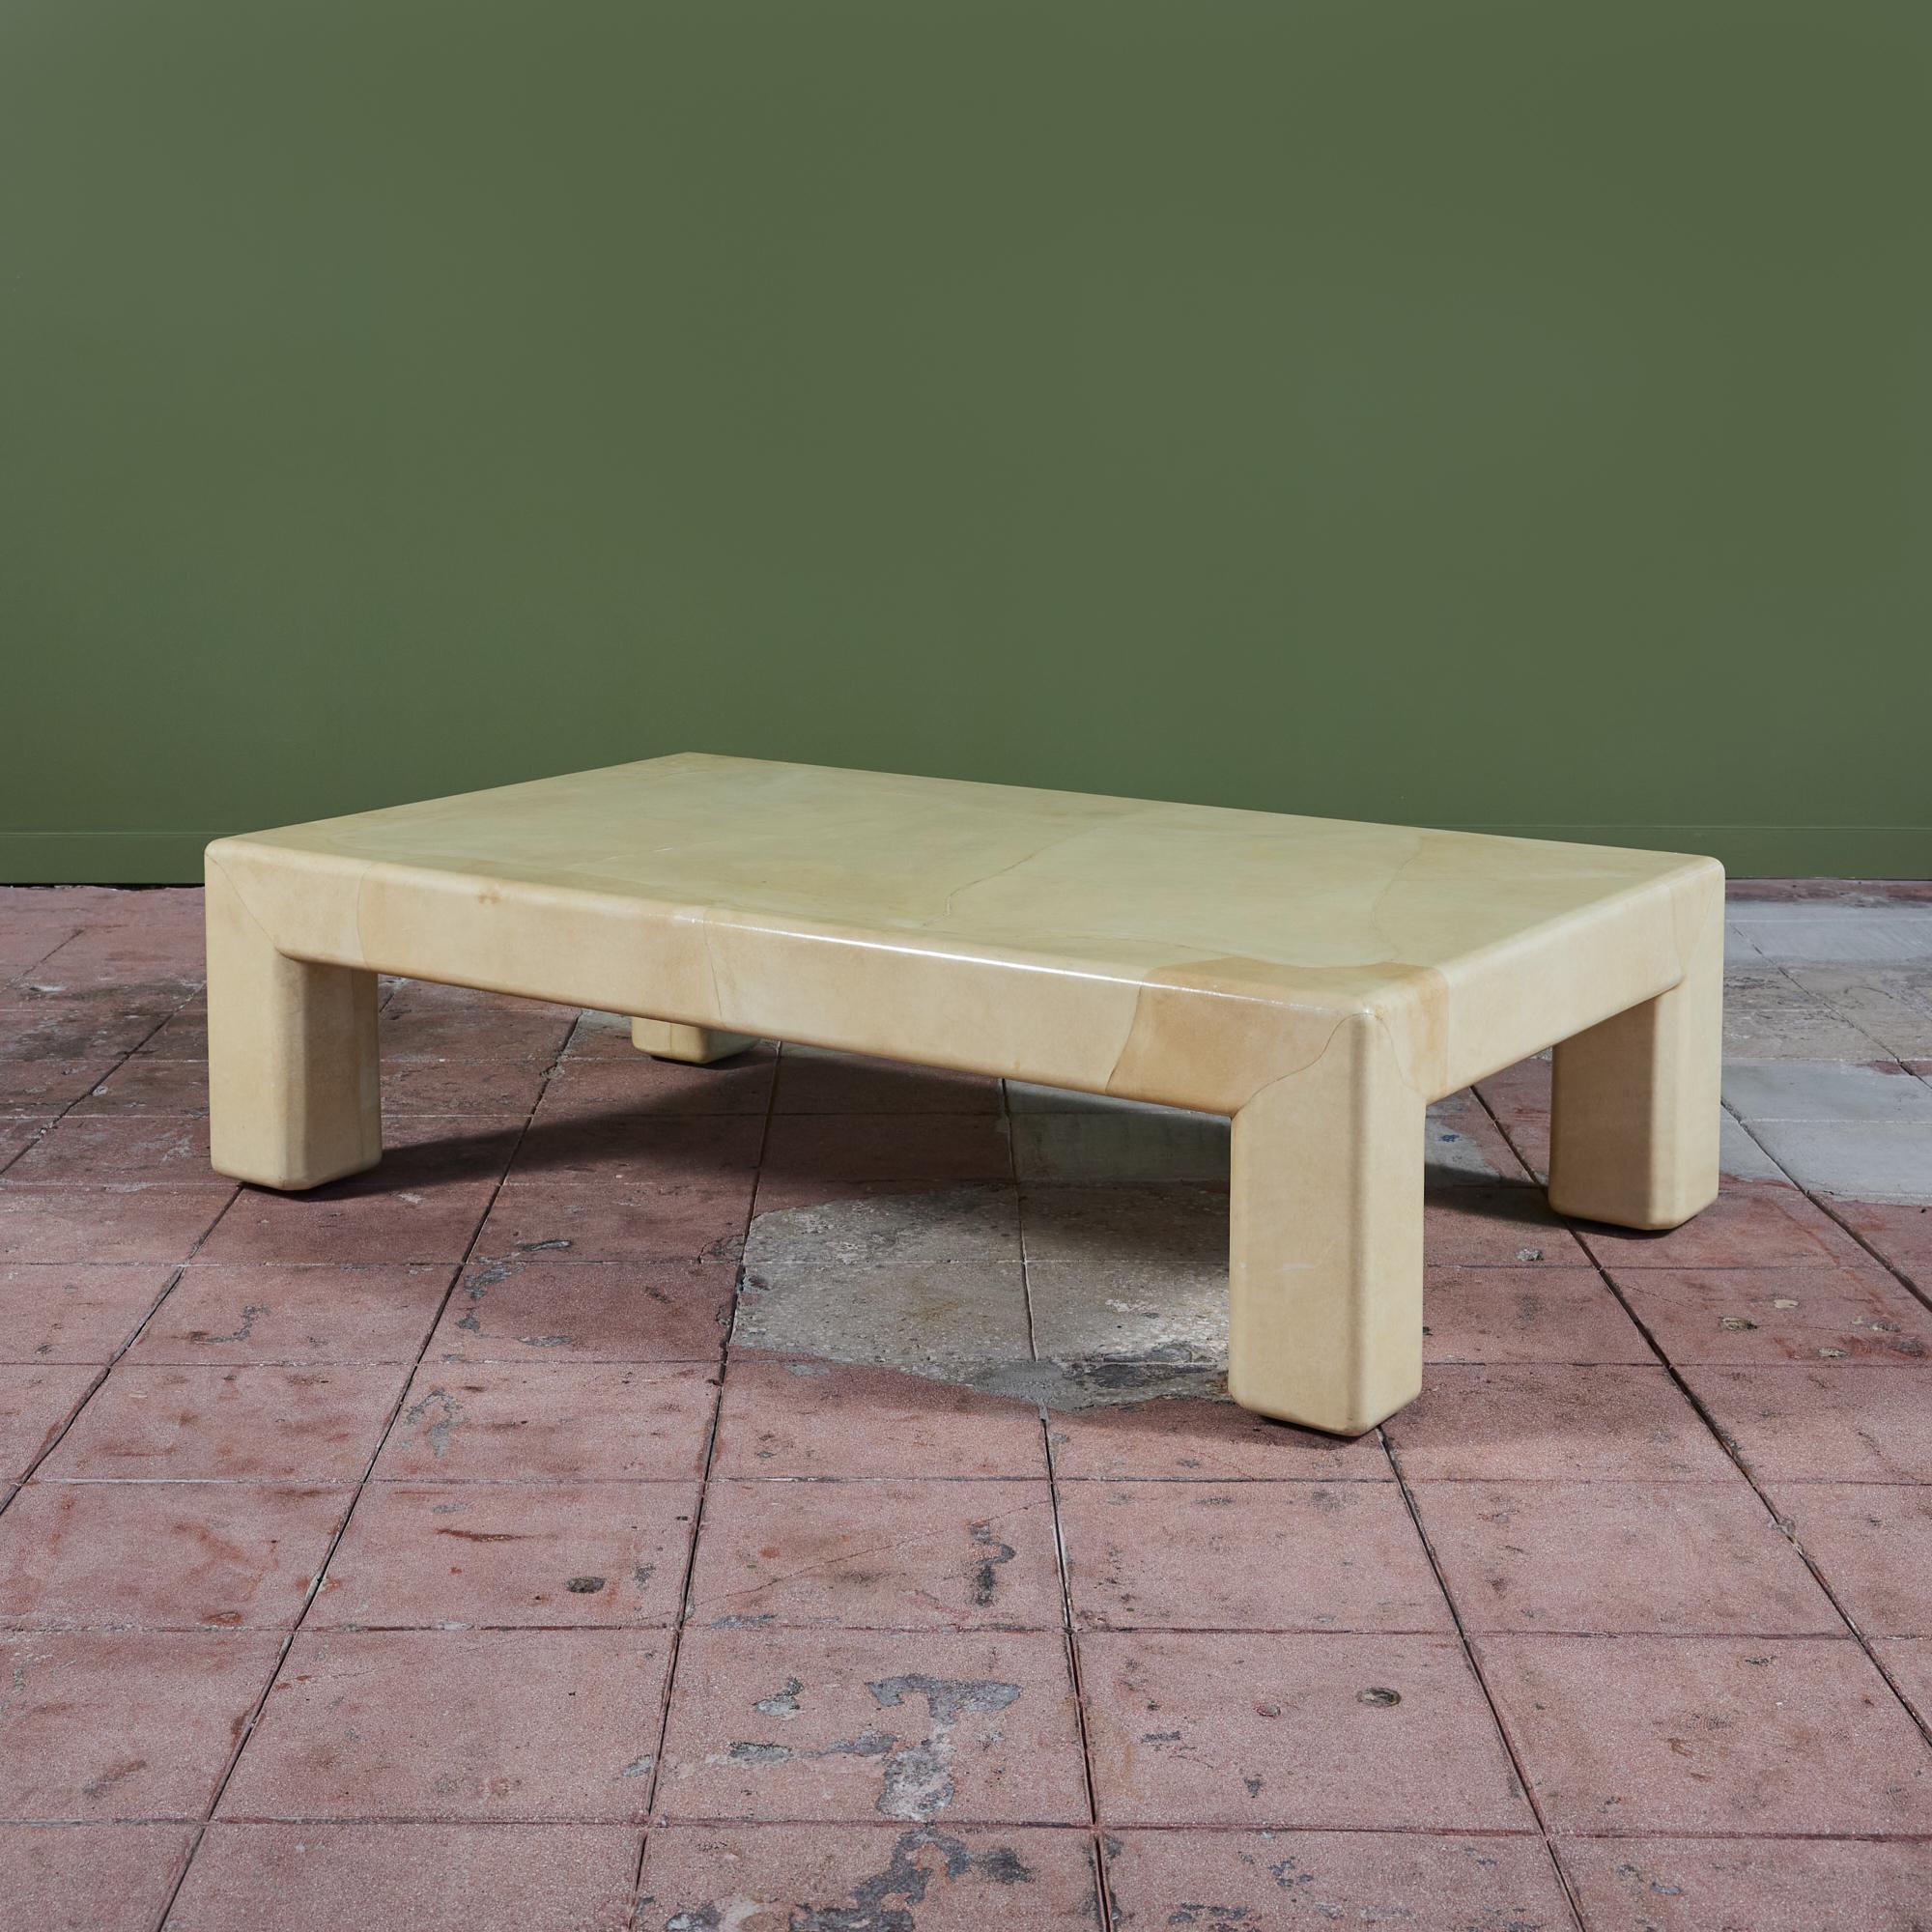 A postmodern rectangular coffee table by Karl Springer, c.1980s, USA. This coffee table features a lacquered goatskin with a smooth finish and soft edges. The table is a natural beige and cream color throughout.

Dimensions
60” width x 36” depth x